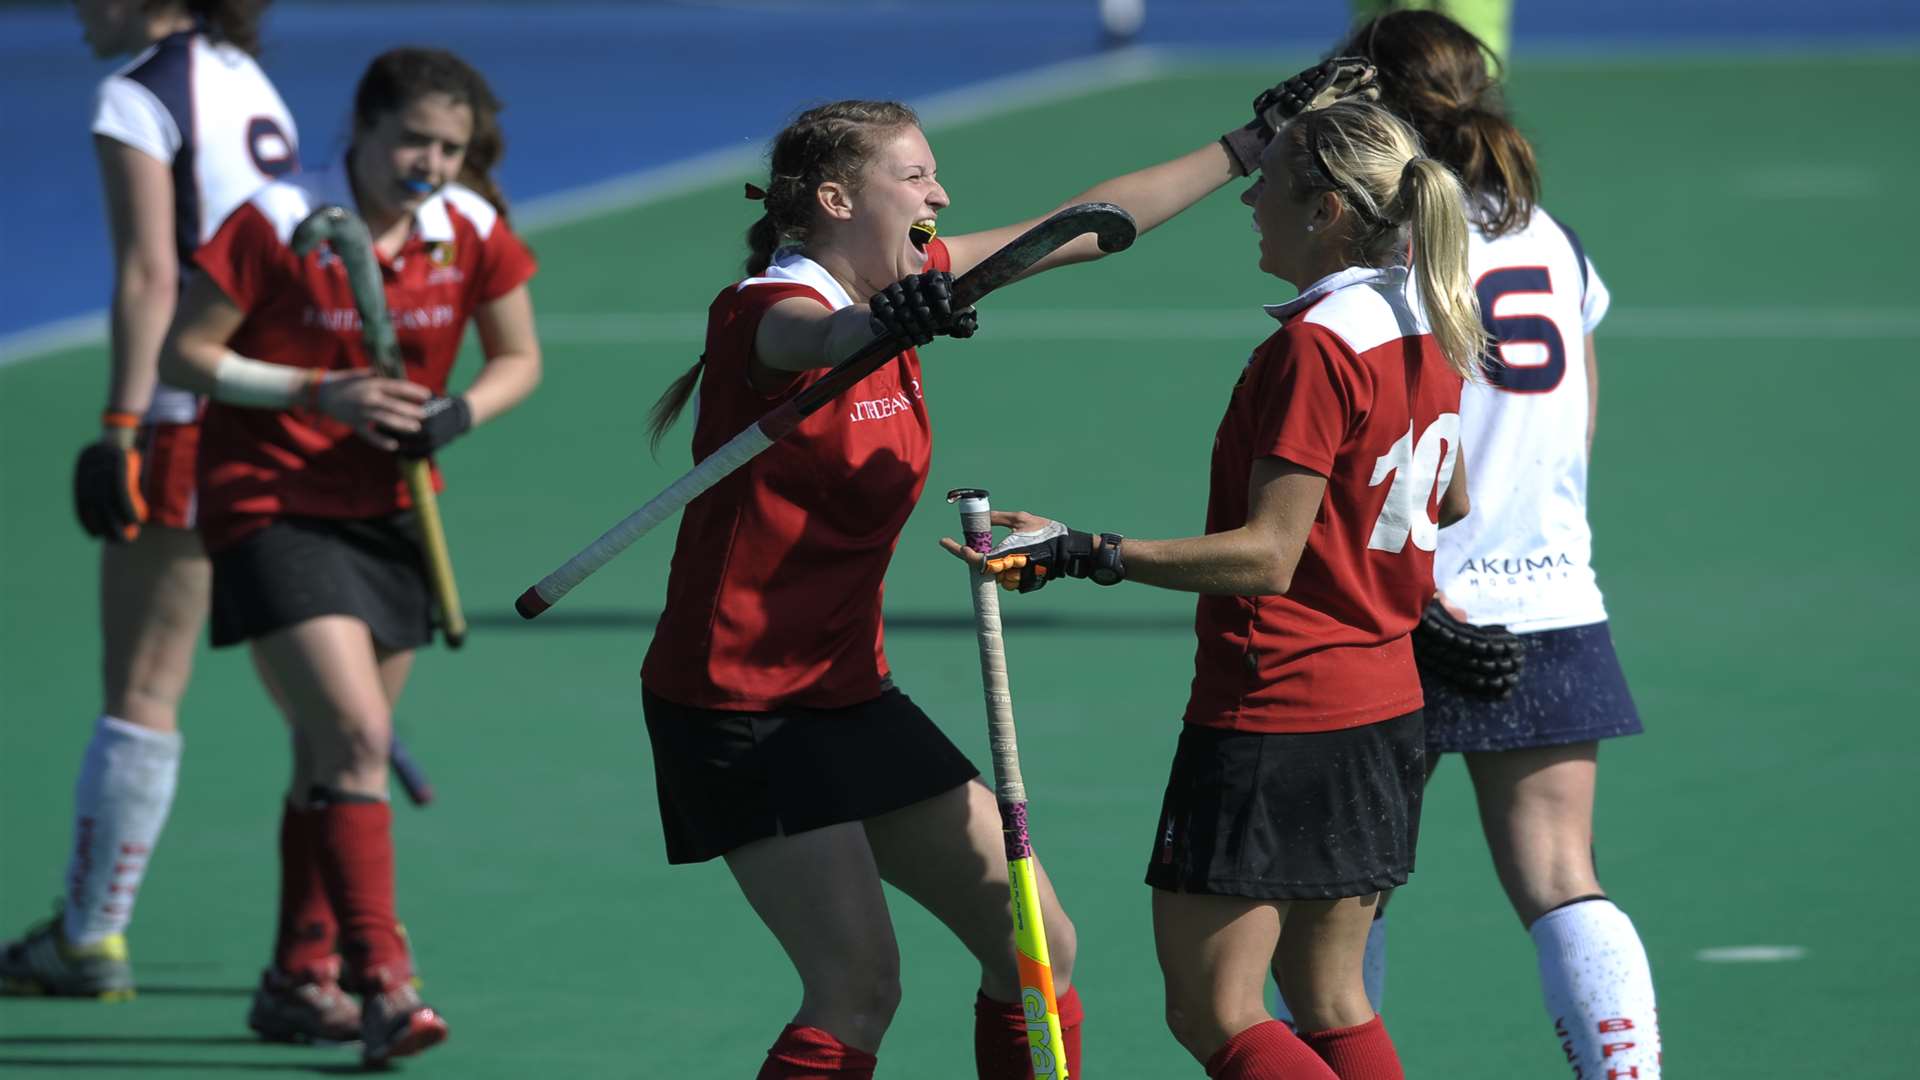 Holcombe’s Shelley Russell, right, celebrates the second goal against Brooklands Poynton Picture: Ady Kerry / England Hockey